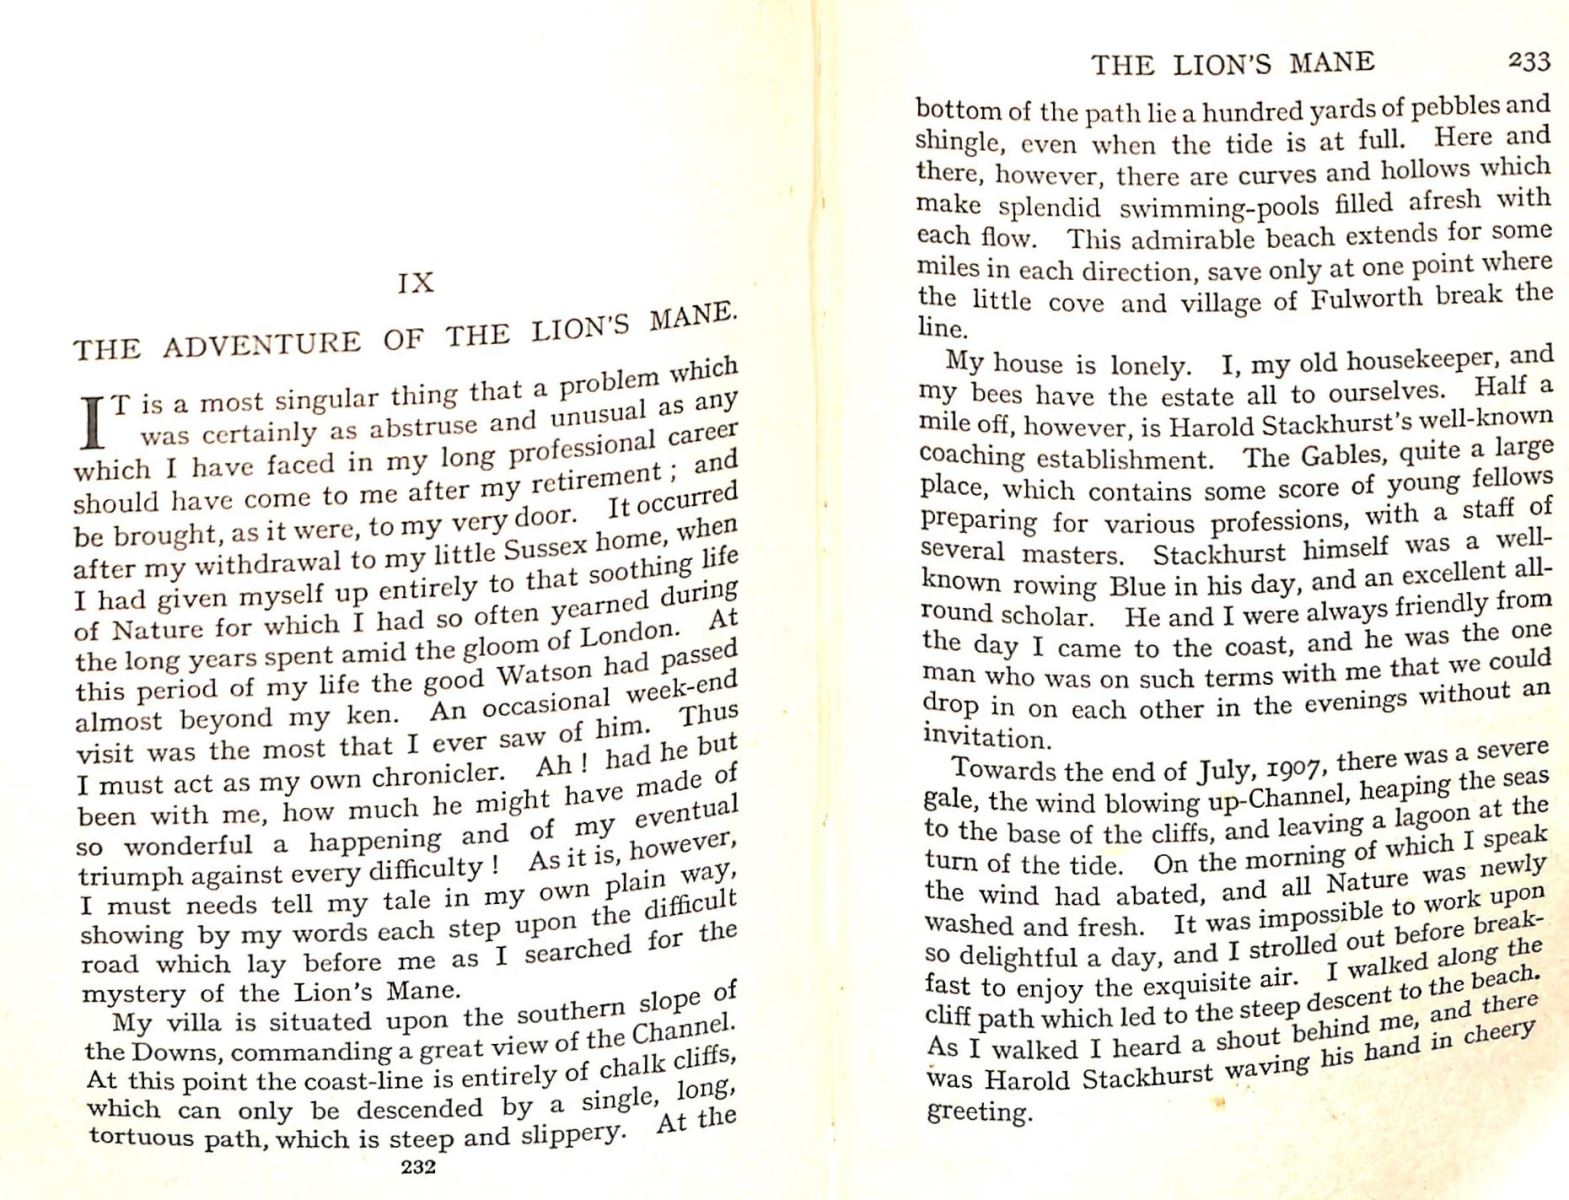 Opening pages of the story "The adventure of the Lion's Mane"